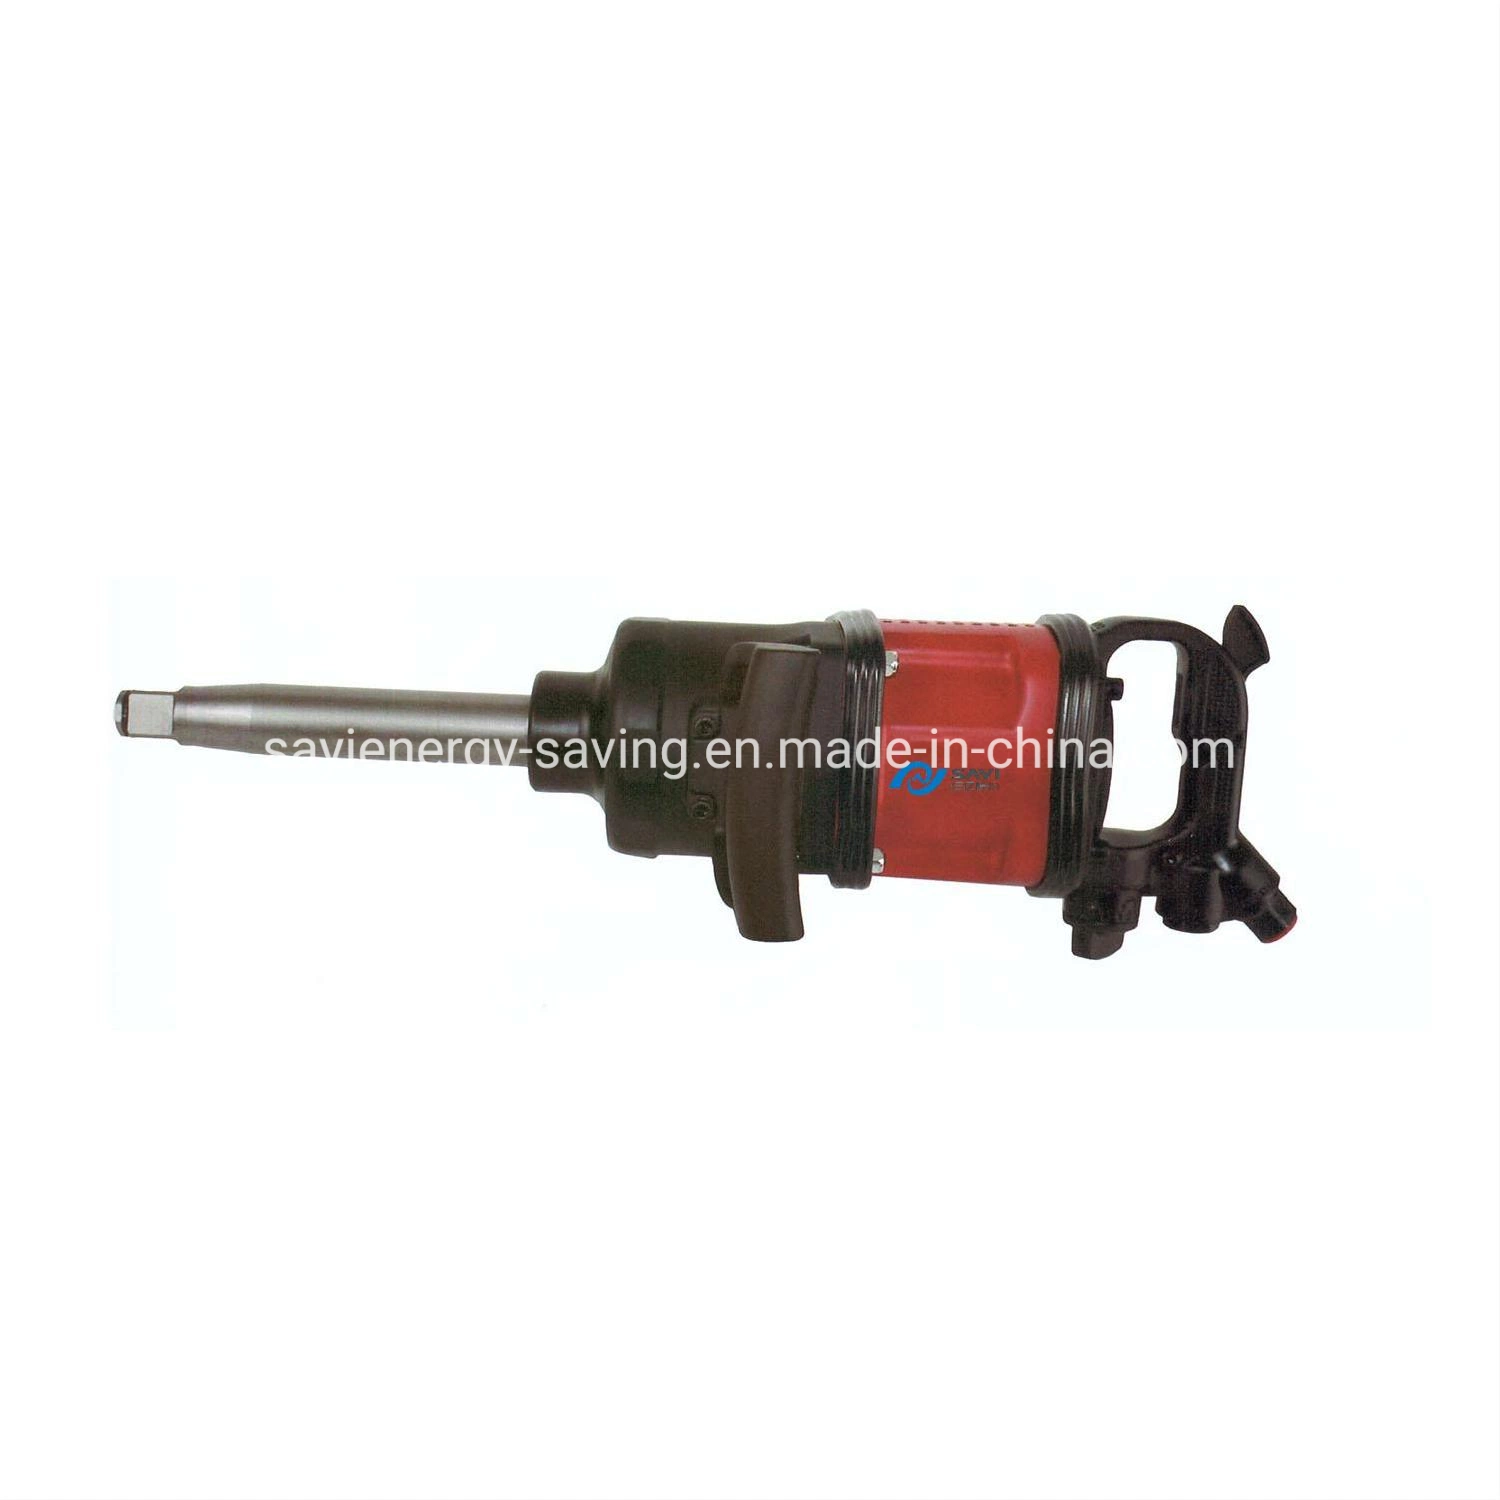 Air Tool Pneumatic Portable Power Handtool Hardware Air Impact Wrench Sy-22L Tools Power Auto Motorcycle Industial Reliable Powerful Pneumatic Tools